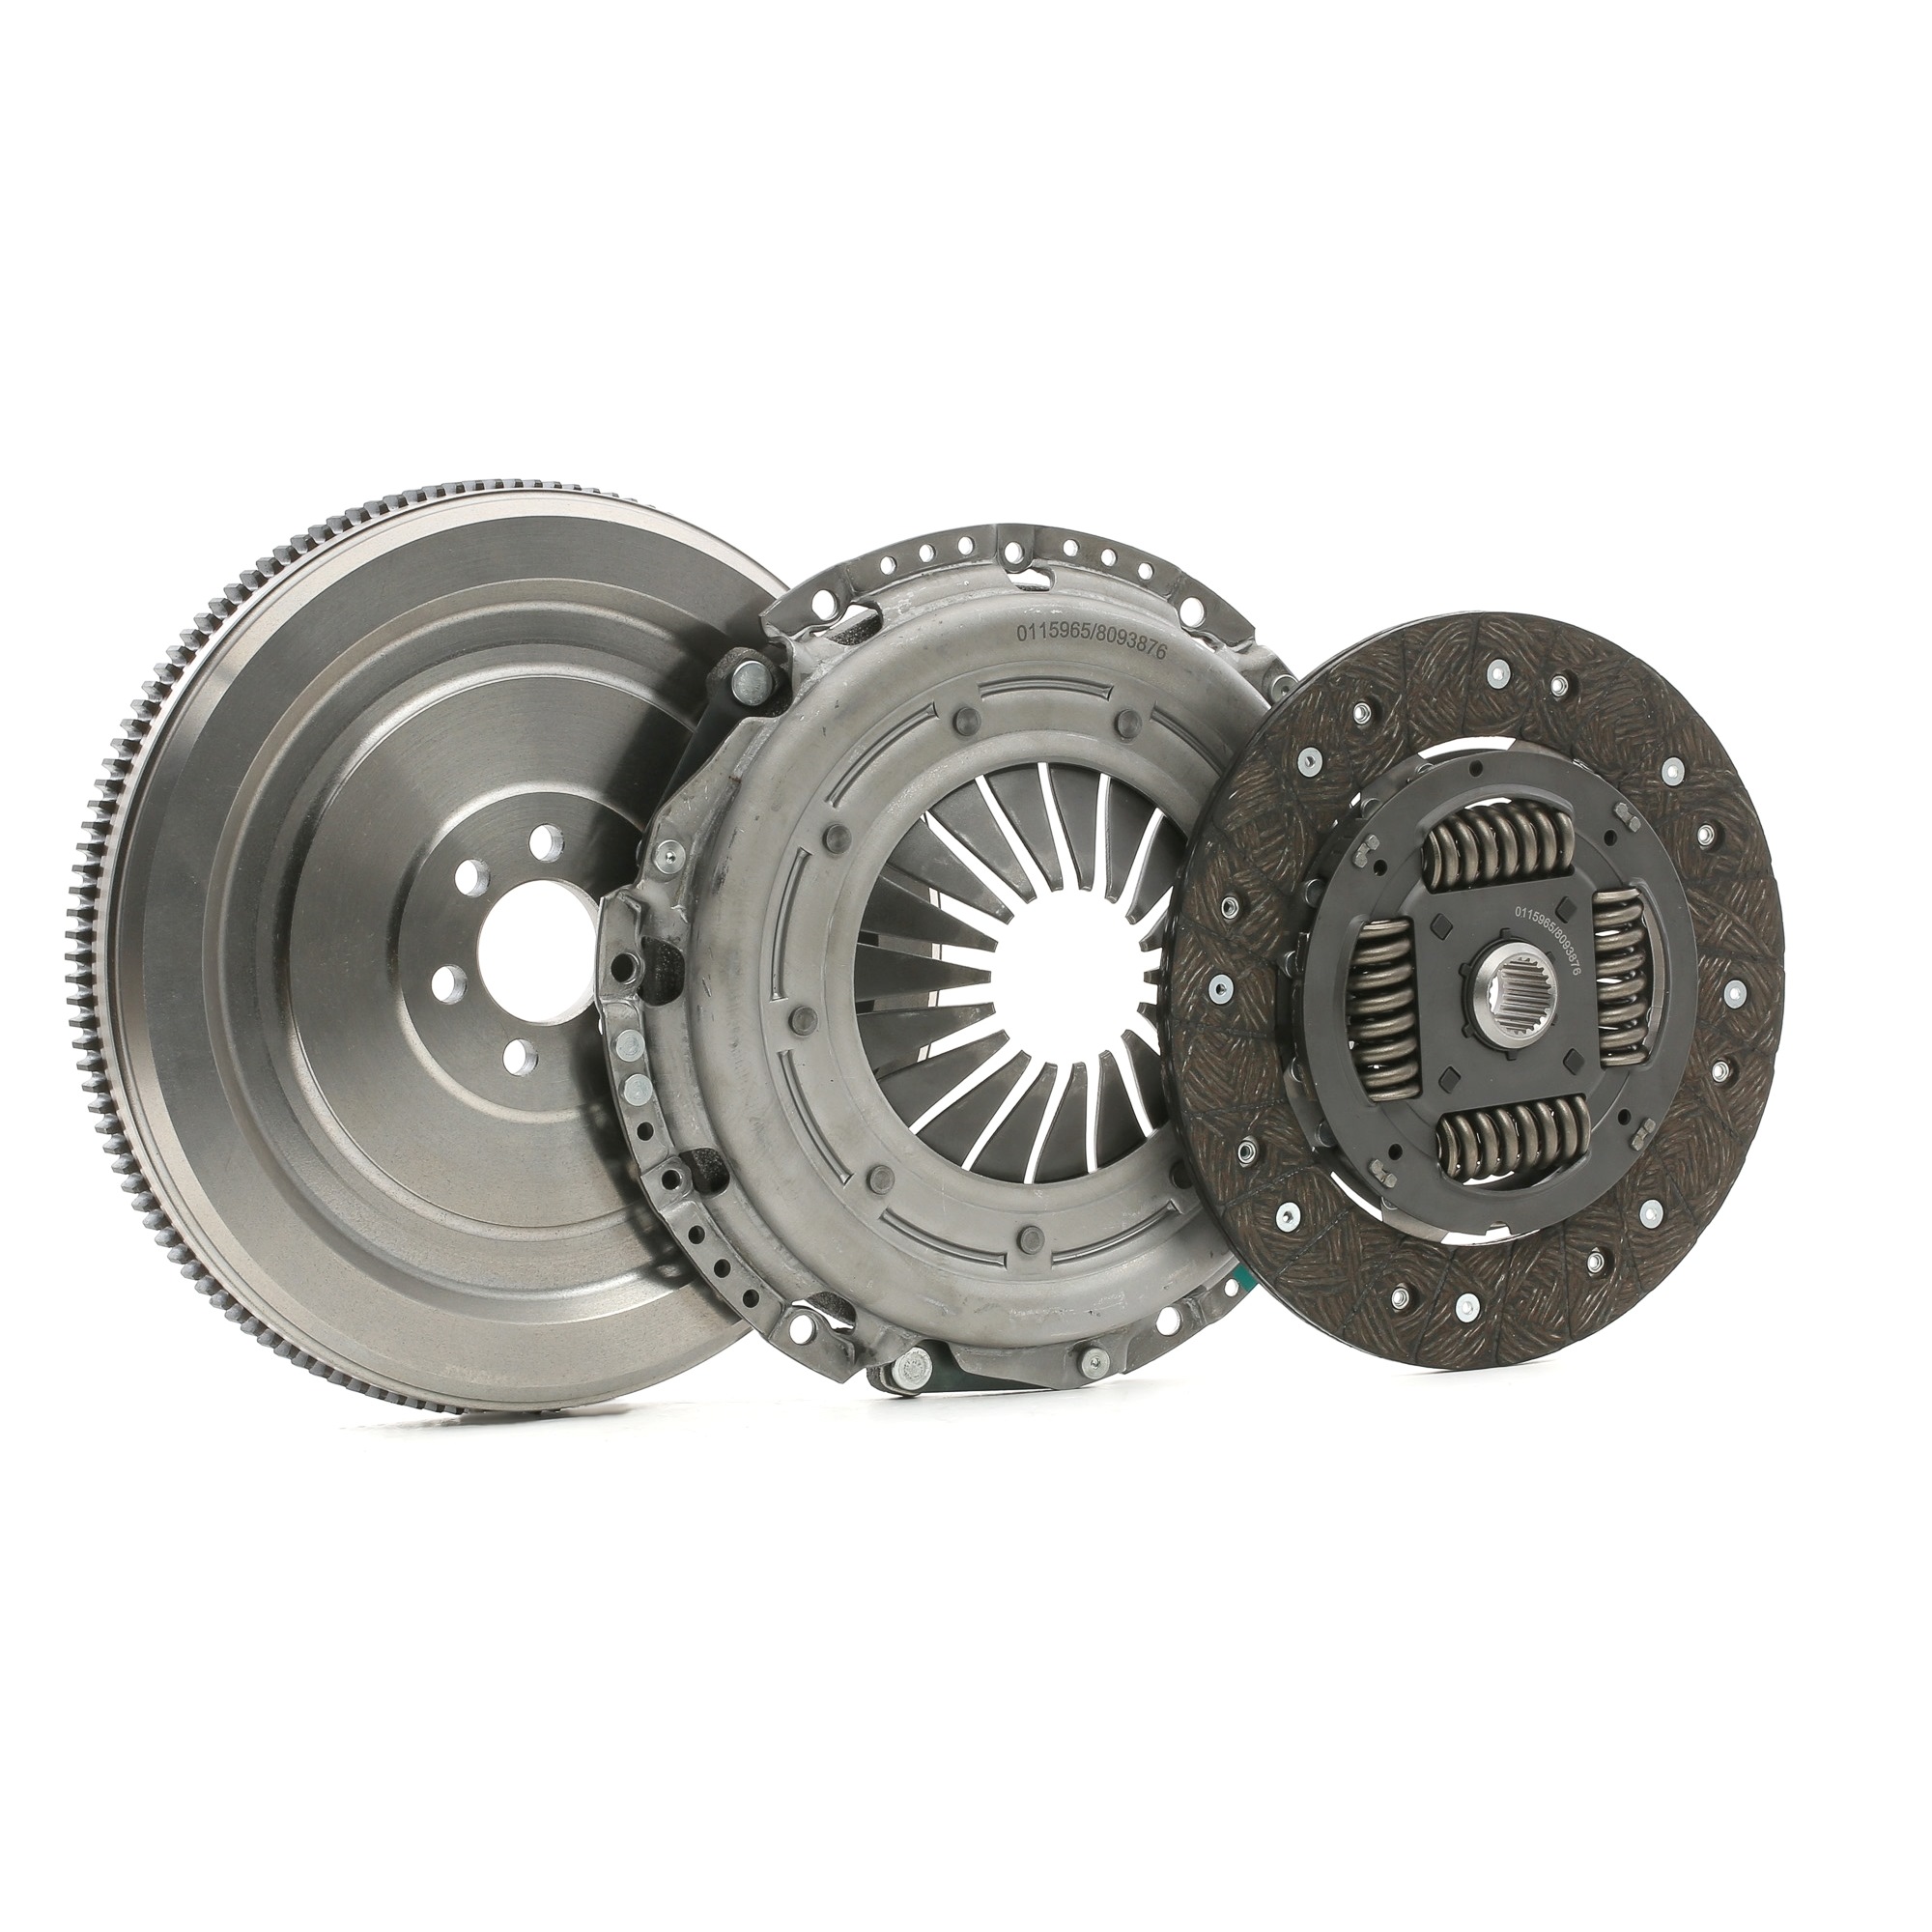 Original STARK Clutch and flywheel kit SKCK-0100107 for VW POLO